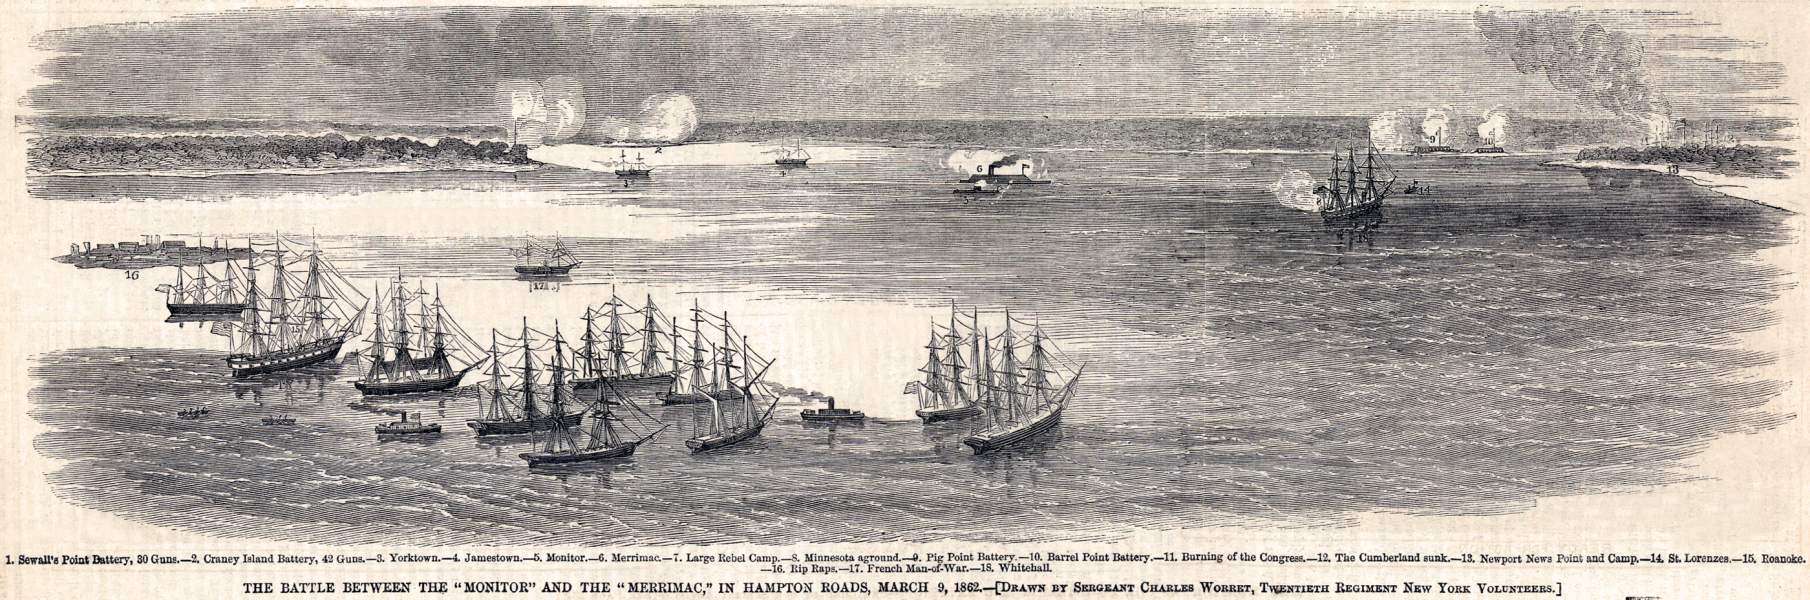 Battle of Hampton Roads, March 9, 1862, artist's impression, zoomable image